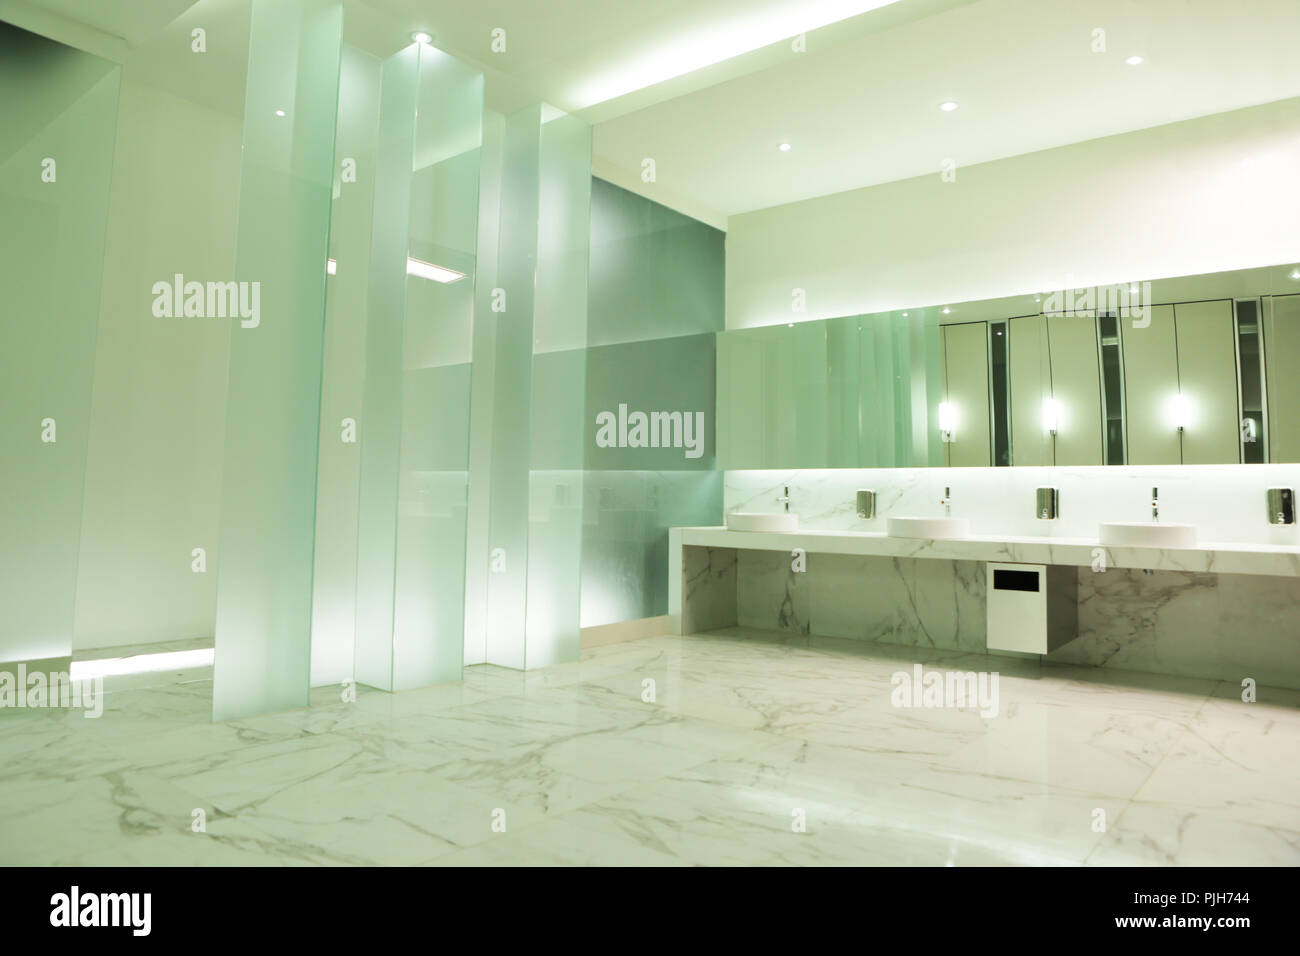 the glass wall and good lighting setup in the elegant public restroom Stock Photo